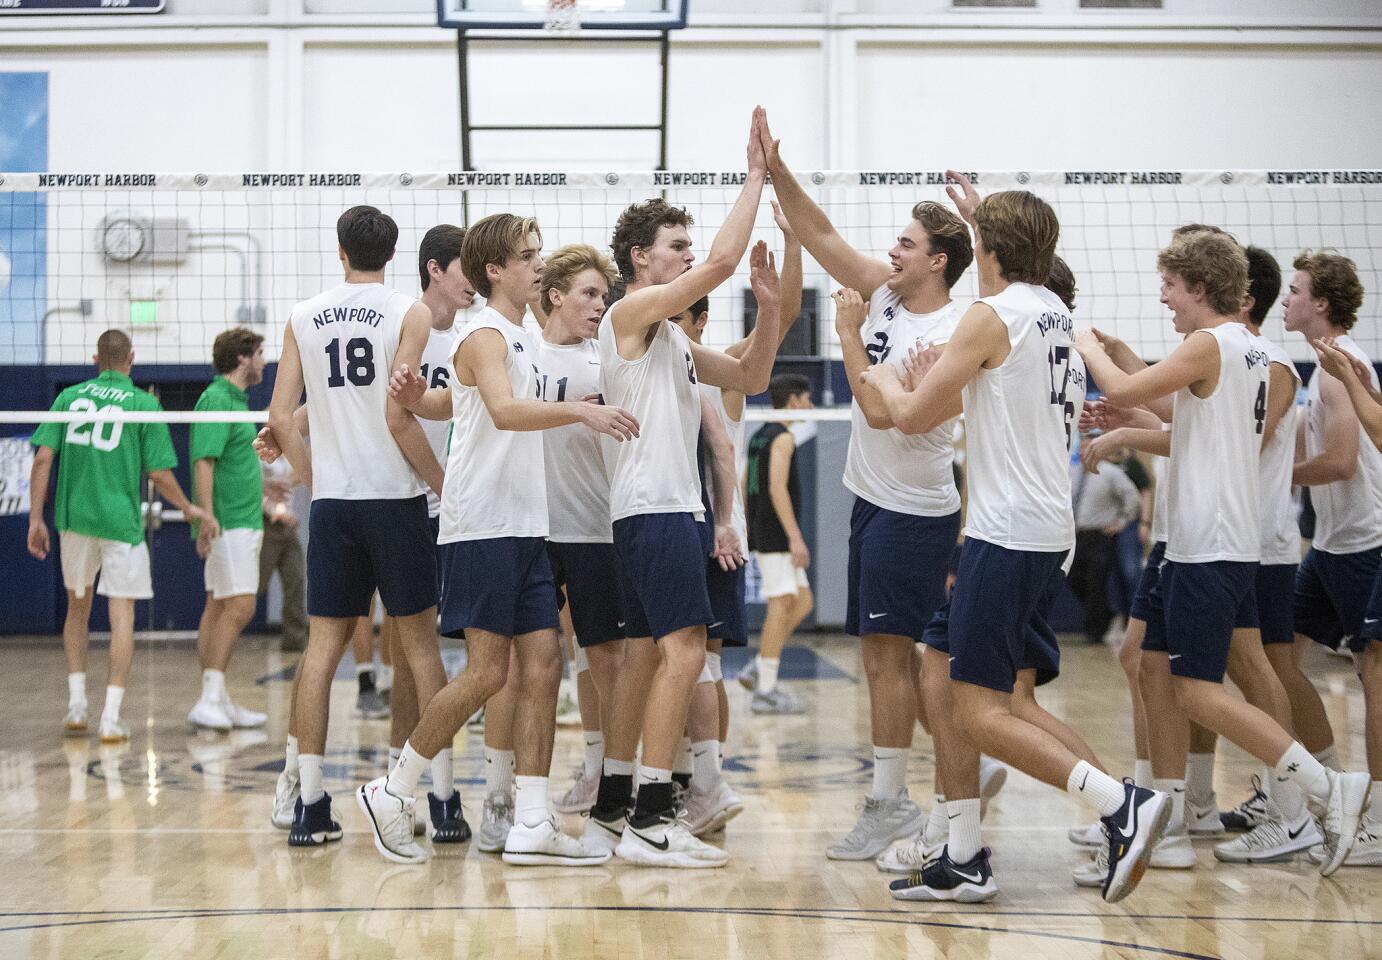 Newport Harbor celebrates sweeping South Torrance 3-0 in the semifinals of the CIF Southern Section Division 1 playoffs on Wednesday, May 16.